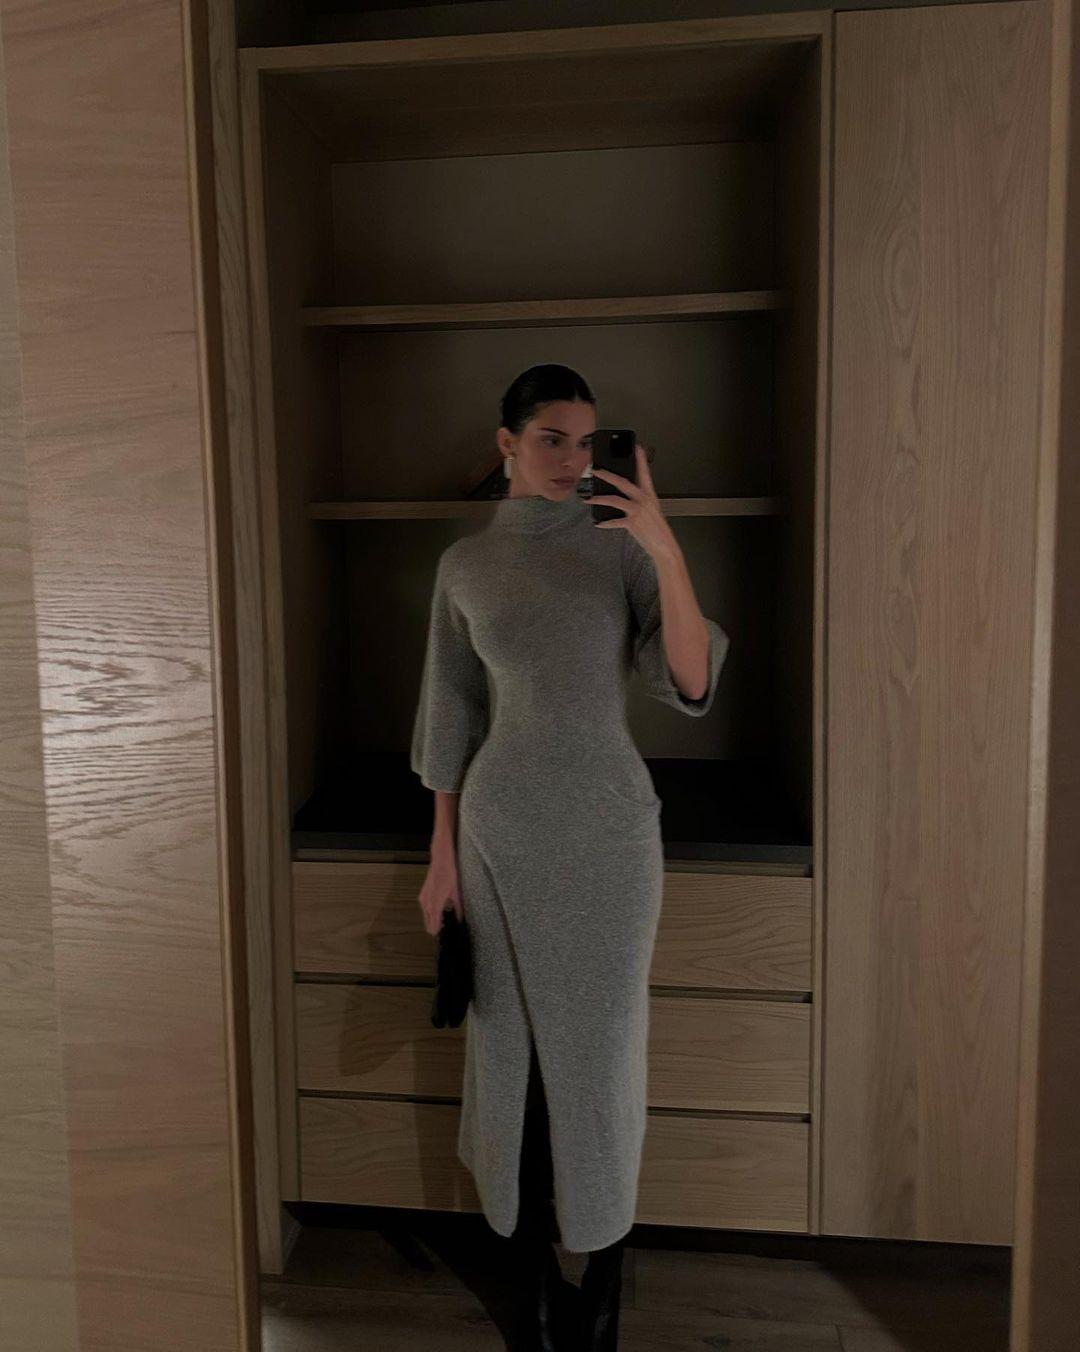 Kendall Jenner recently donned this grey midi dress for her 'gram